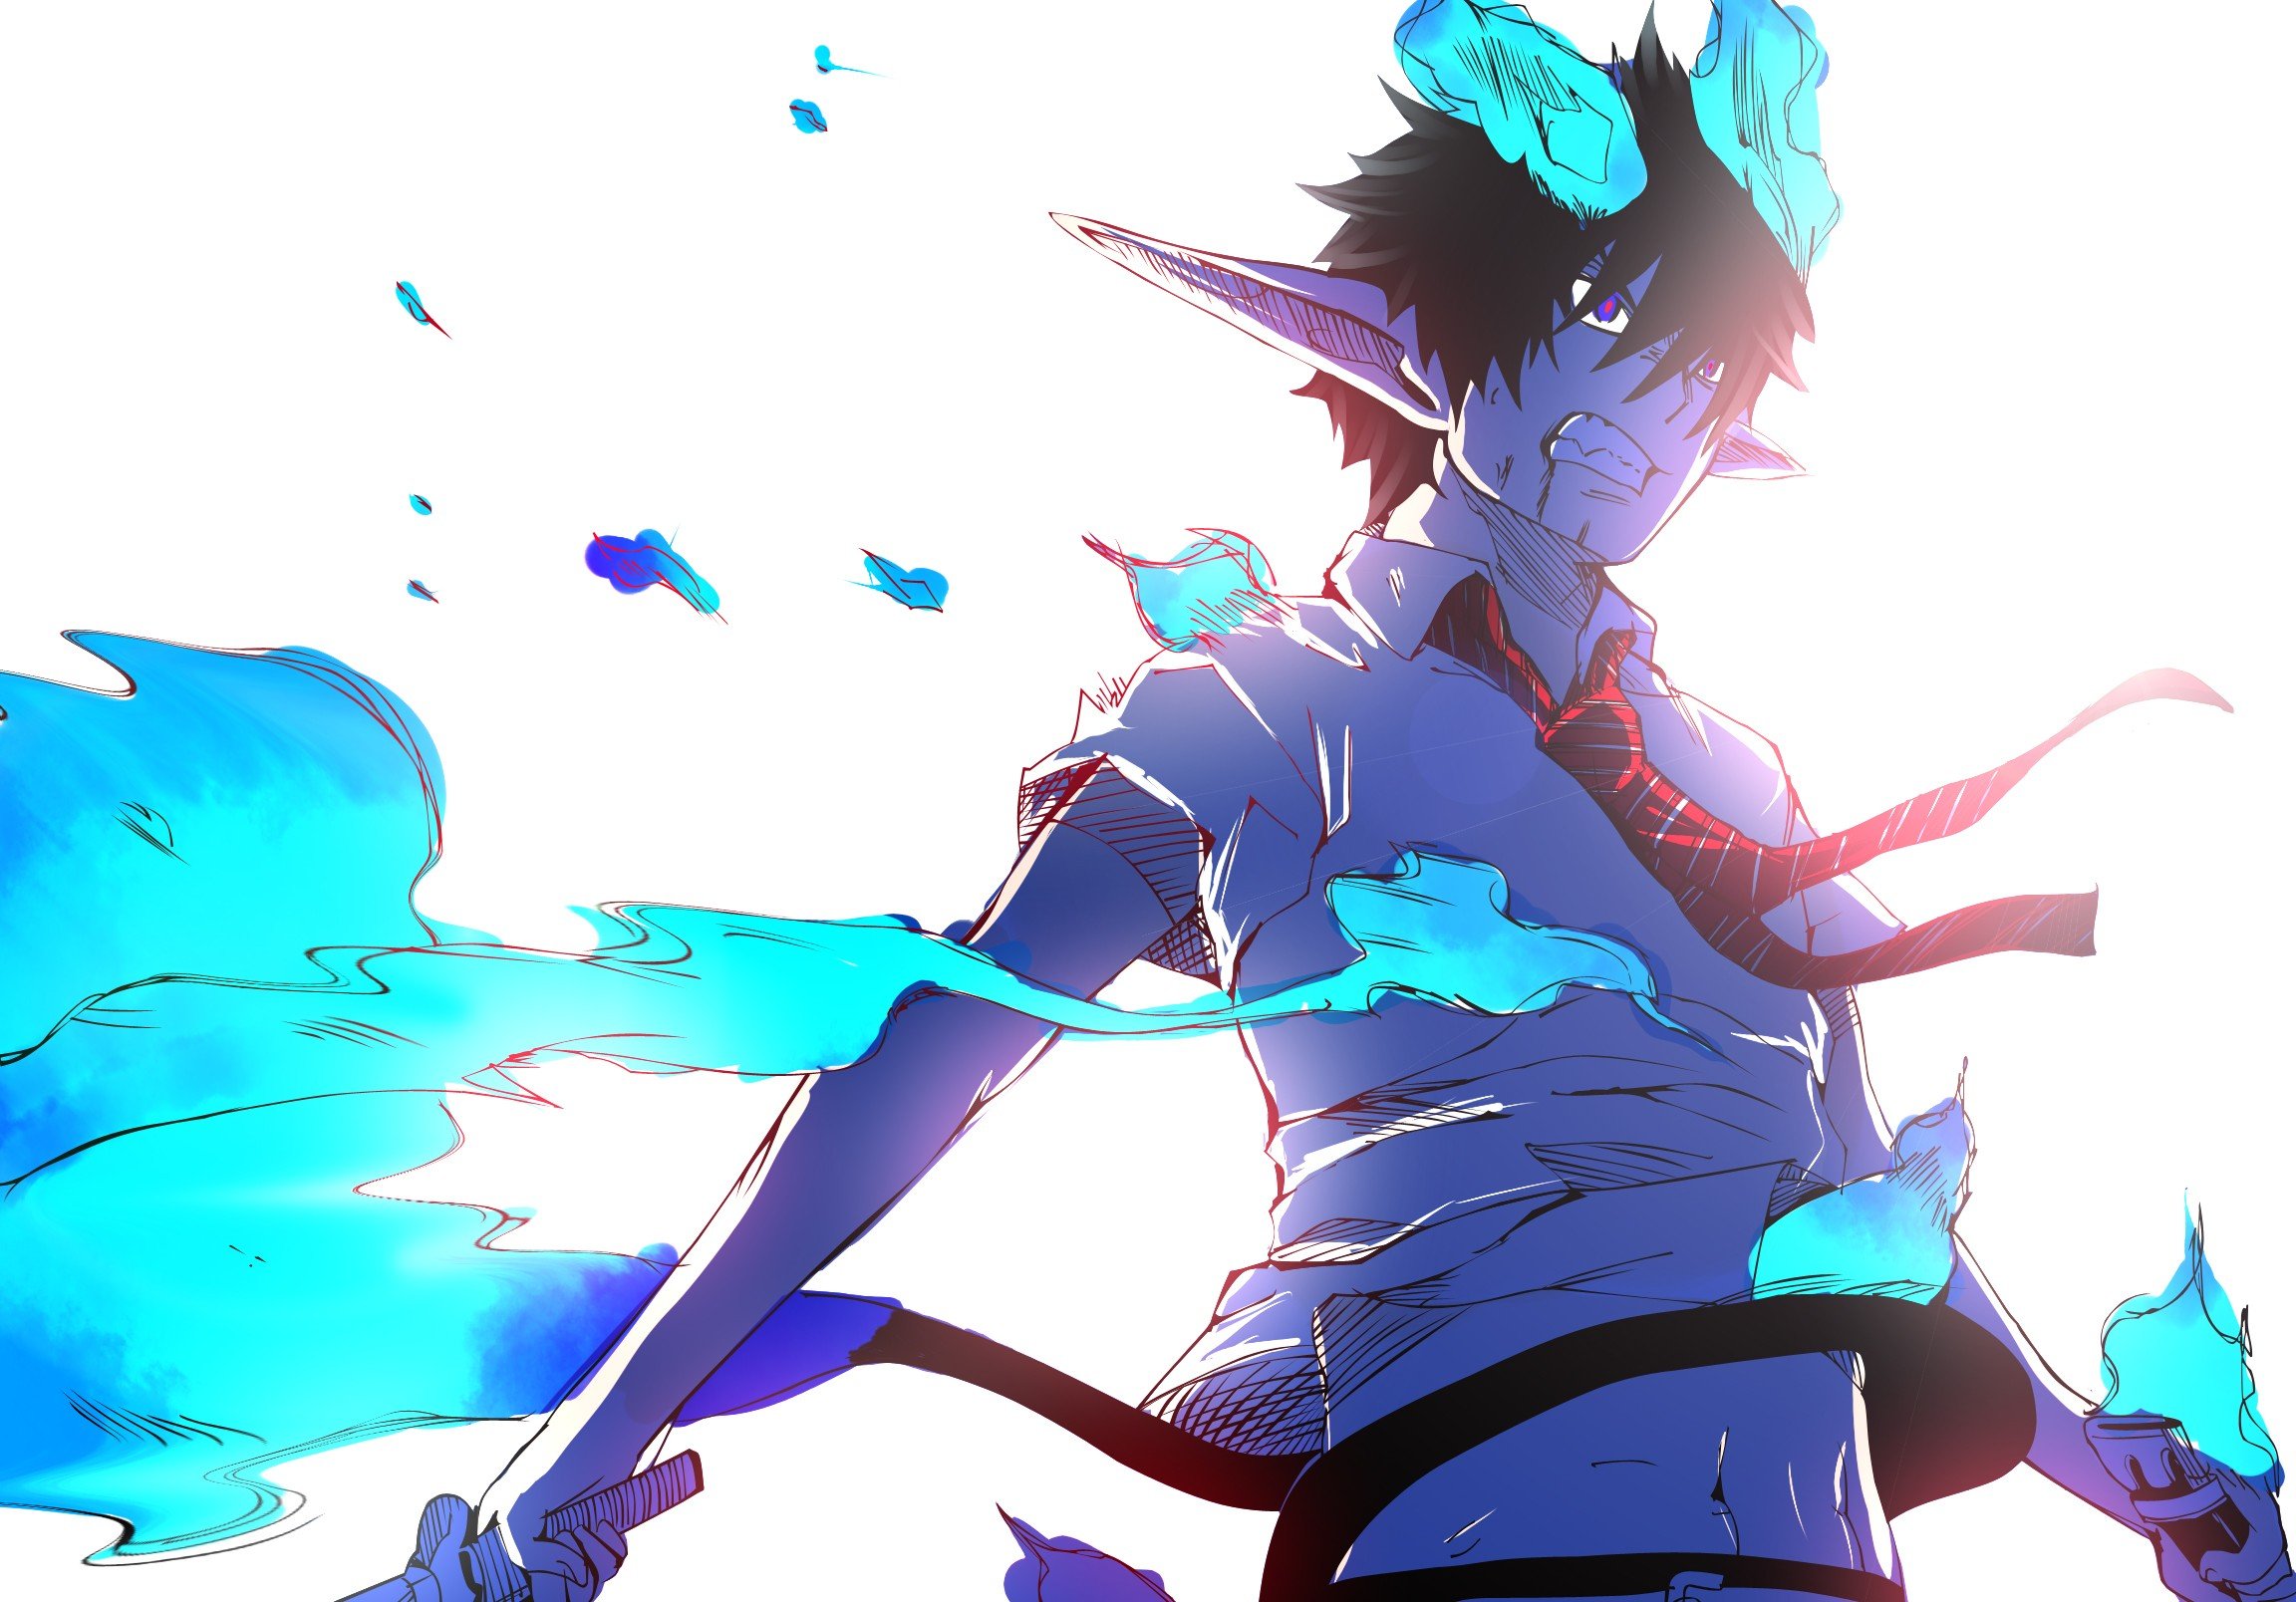 3. Rin Okumura from Blue Exorcist - wide 2